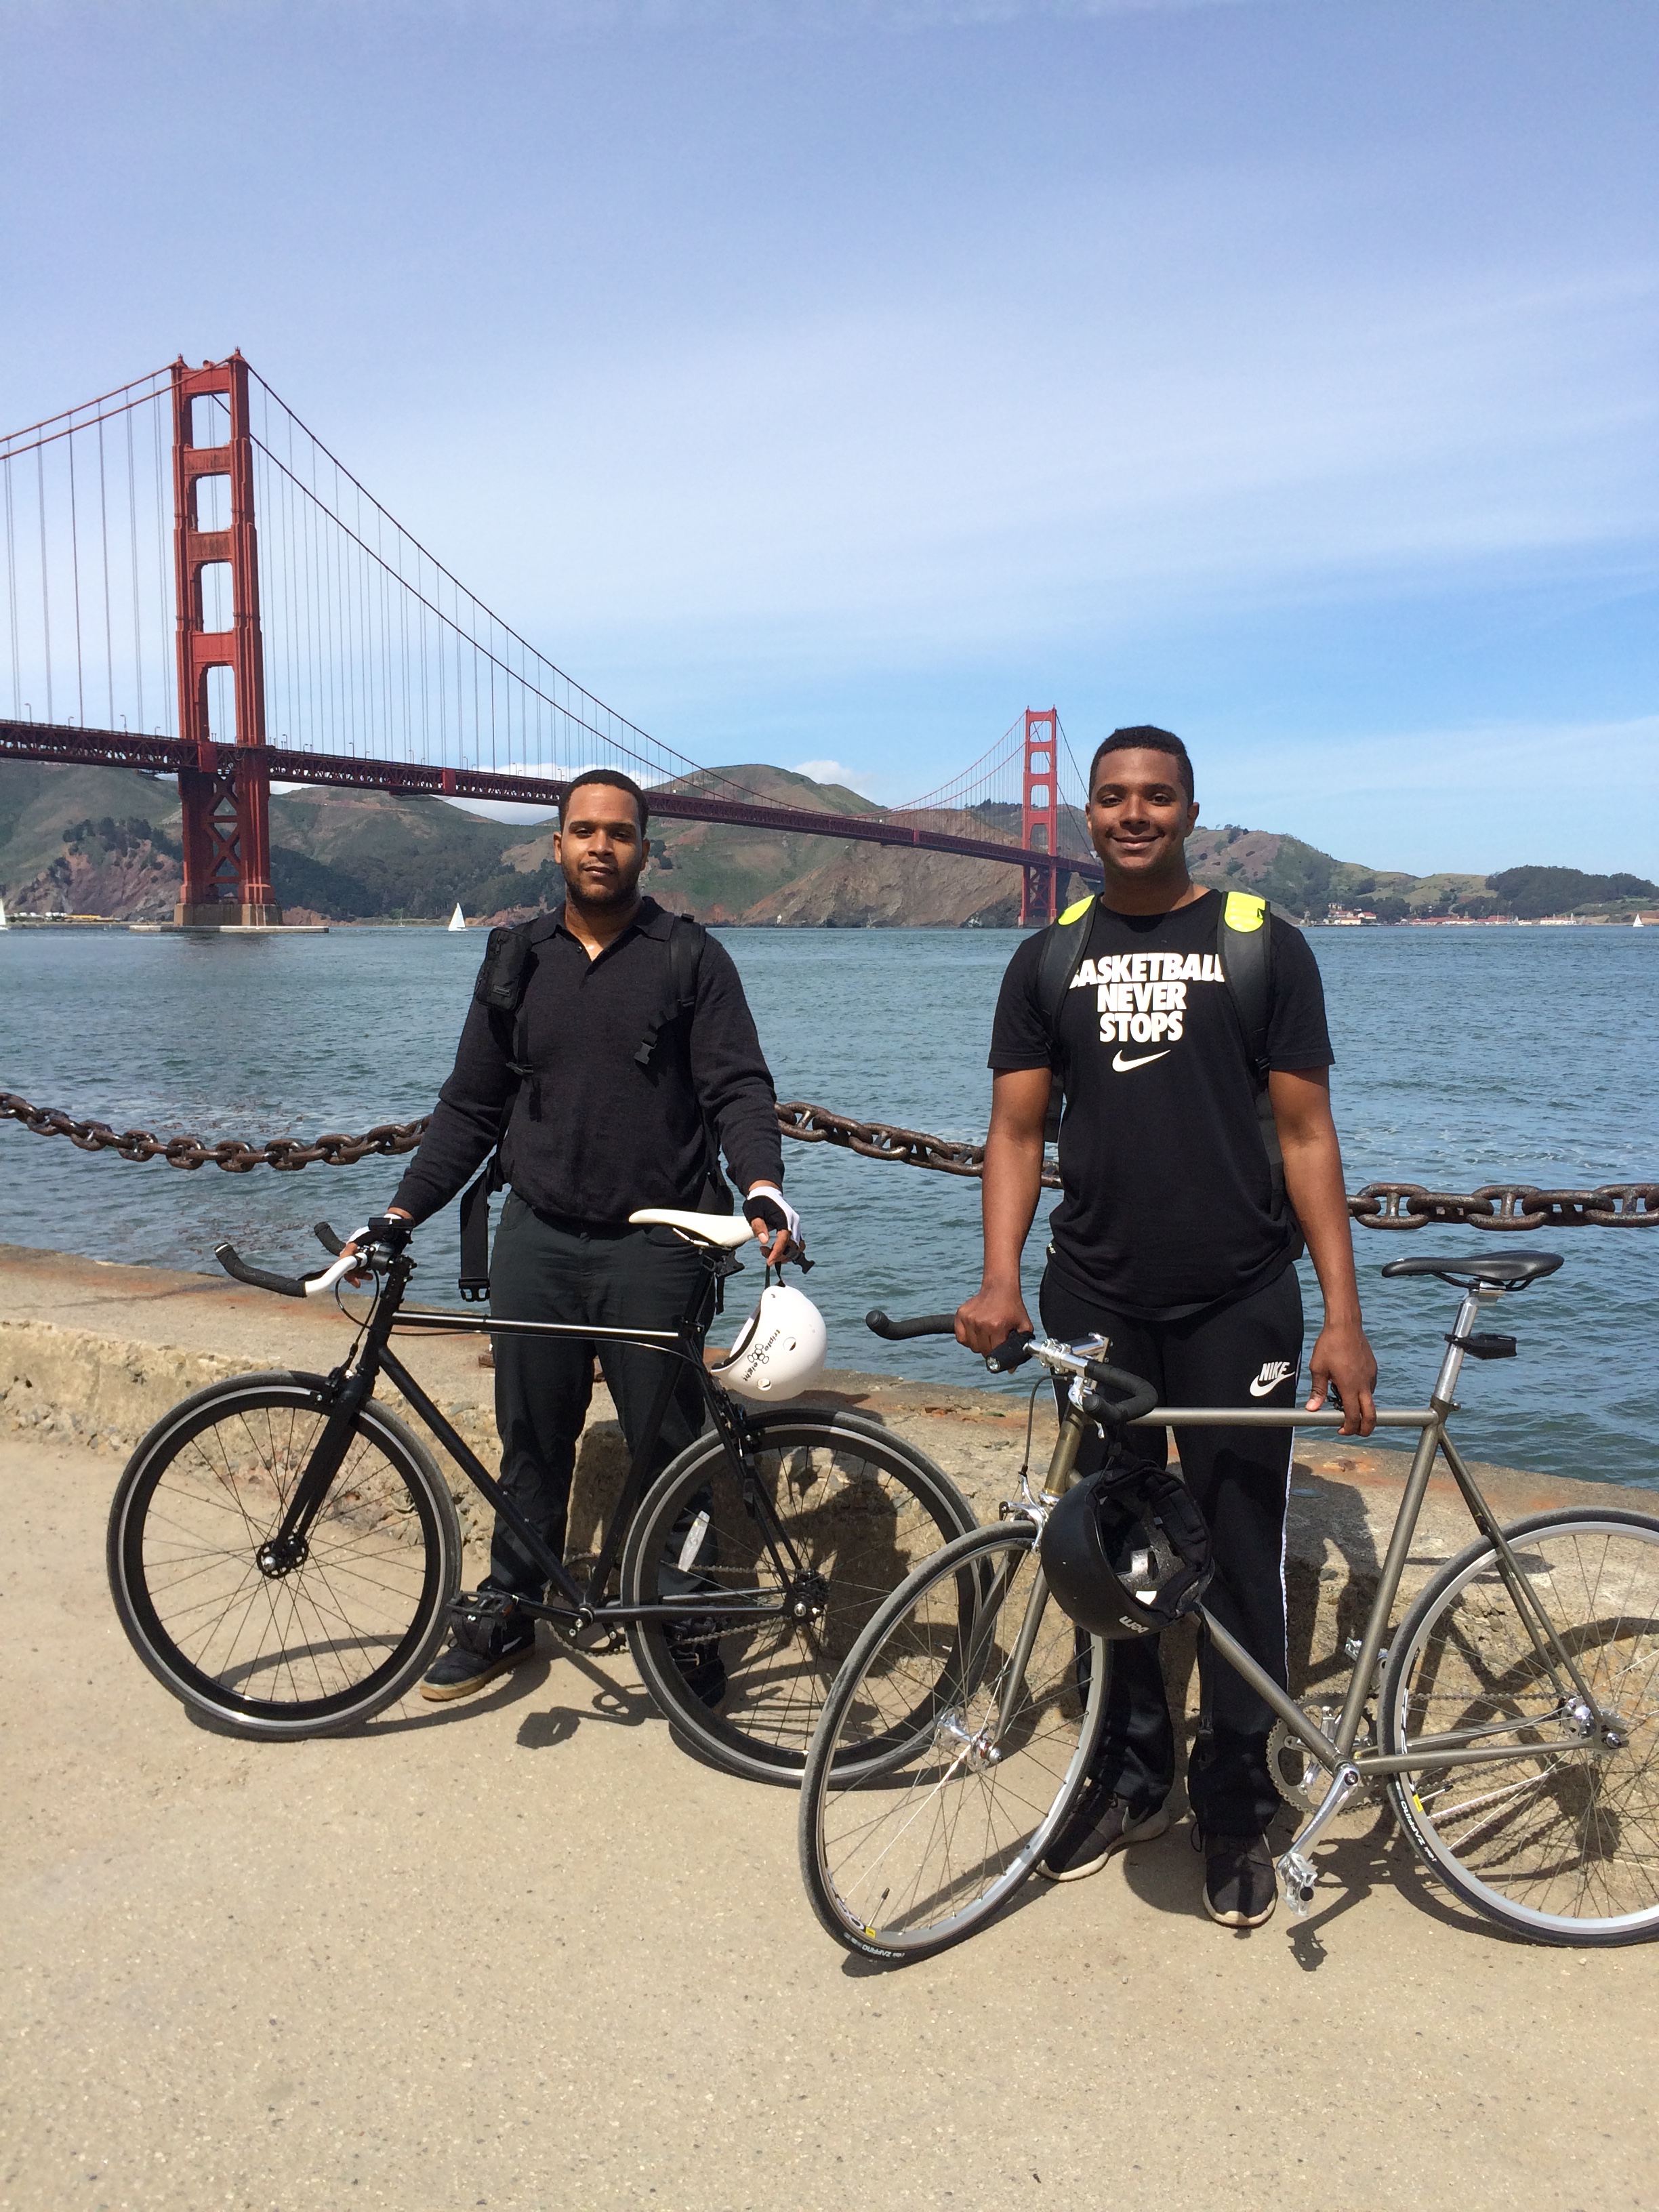 William and Robert with the Golden Gate Bridge in the background